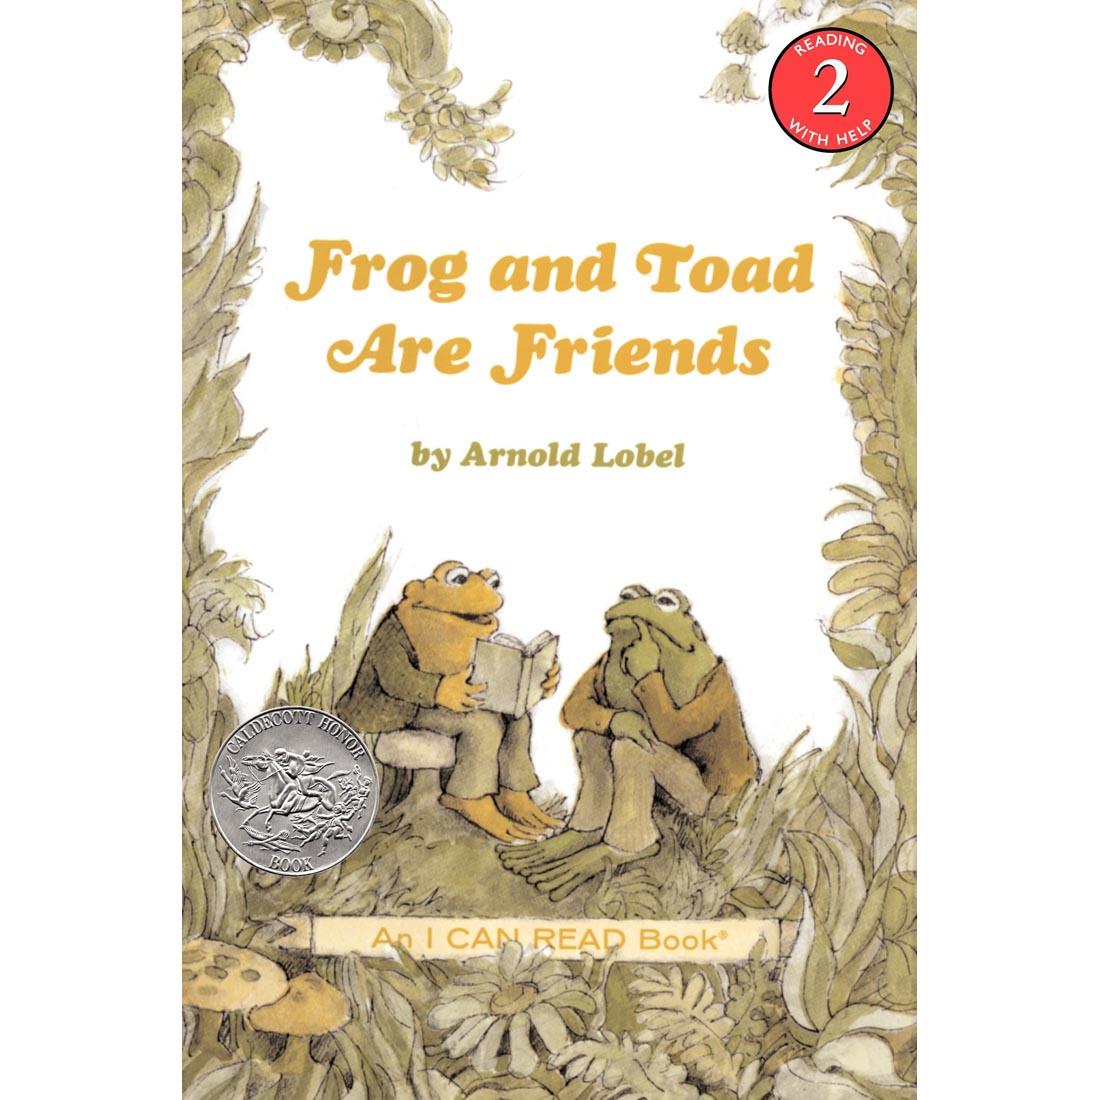 Frog & Toad Are Friends - An I Can Read Book, Level 2